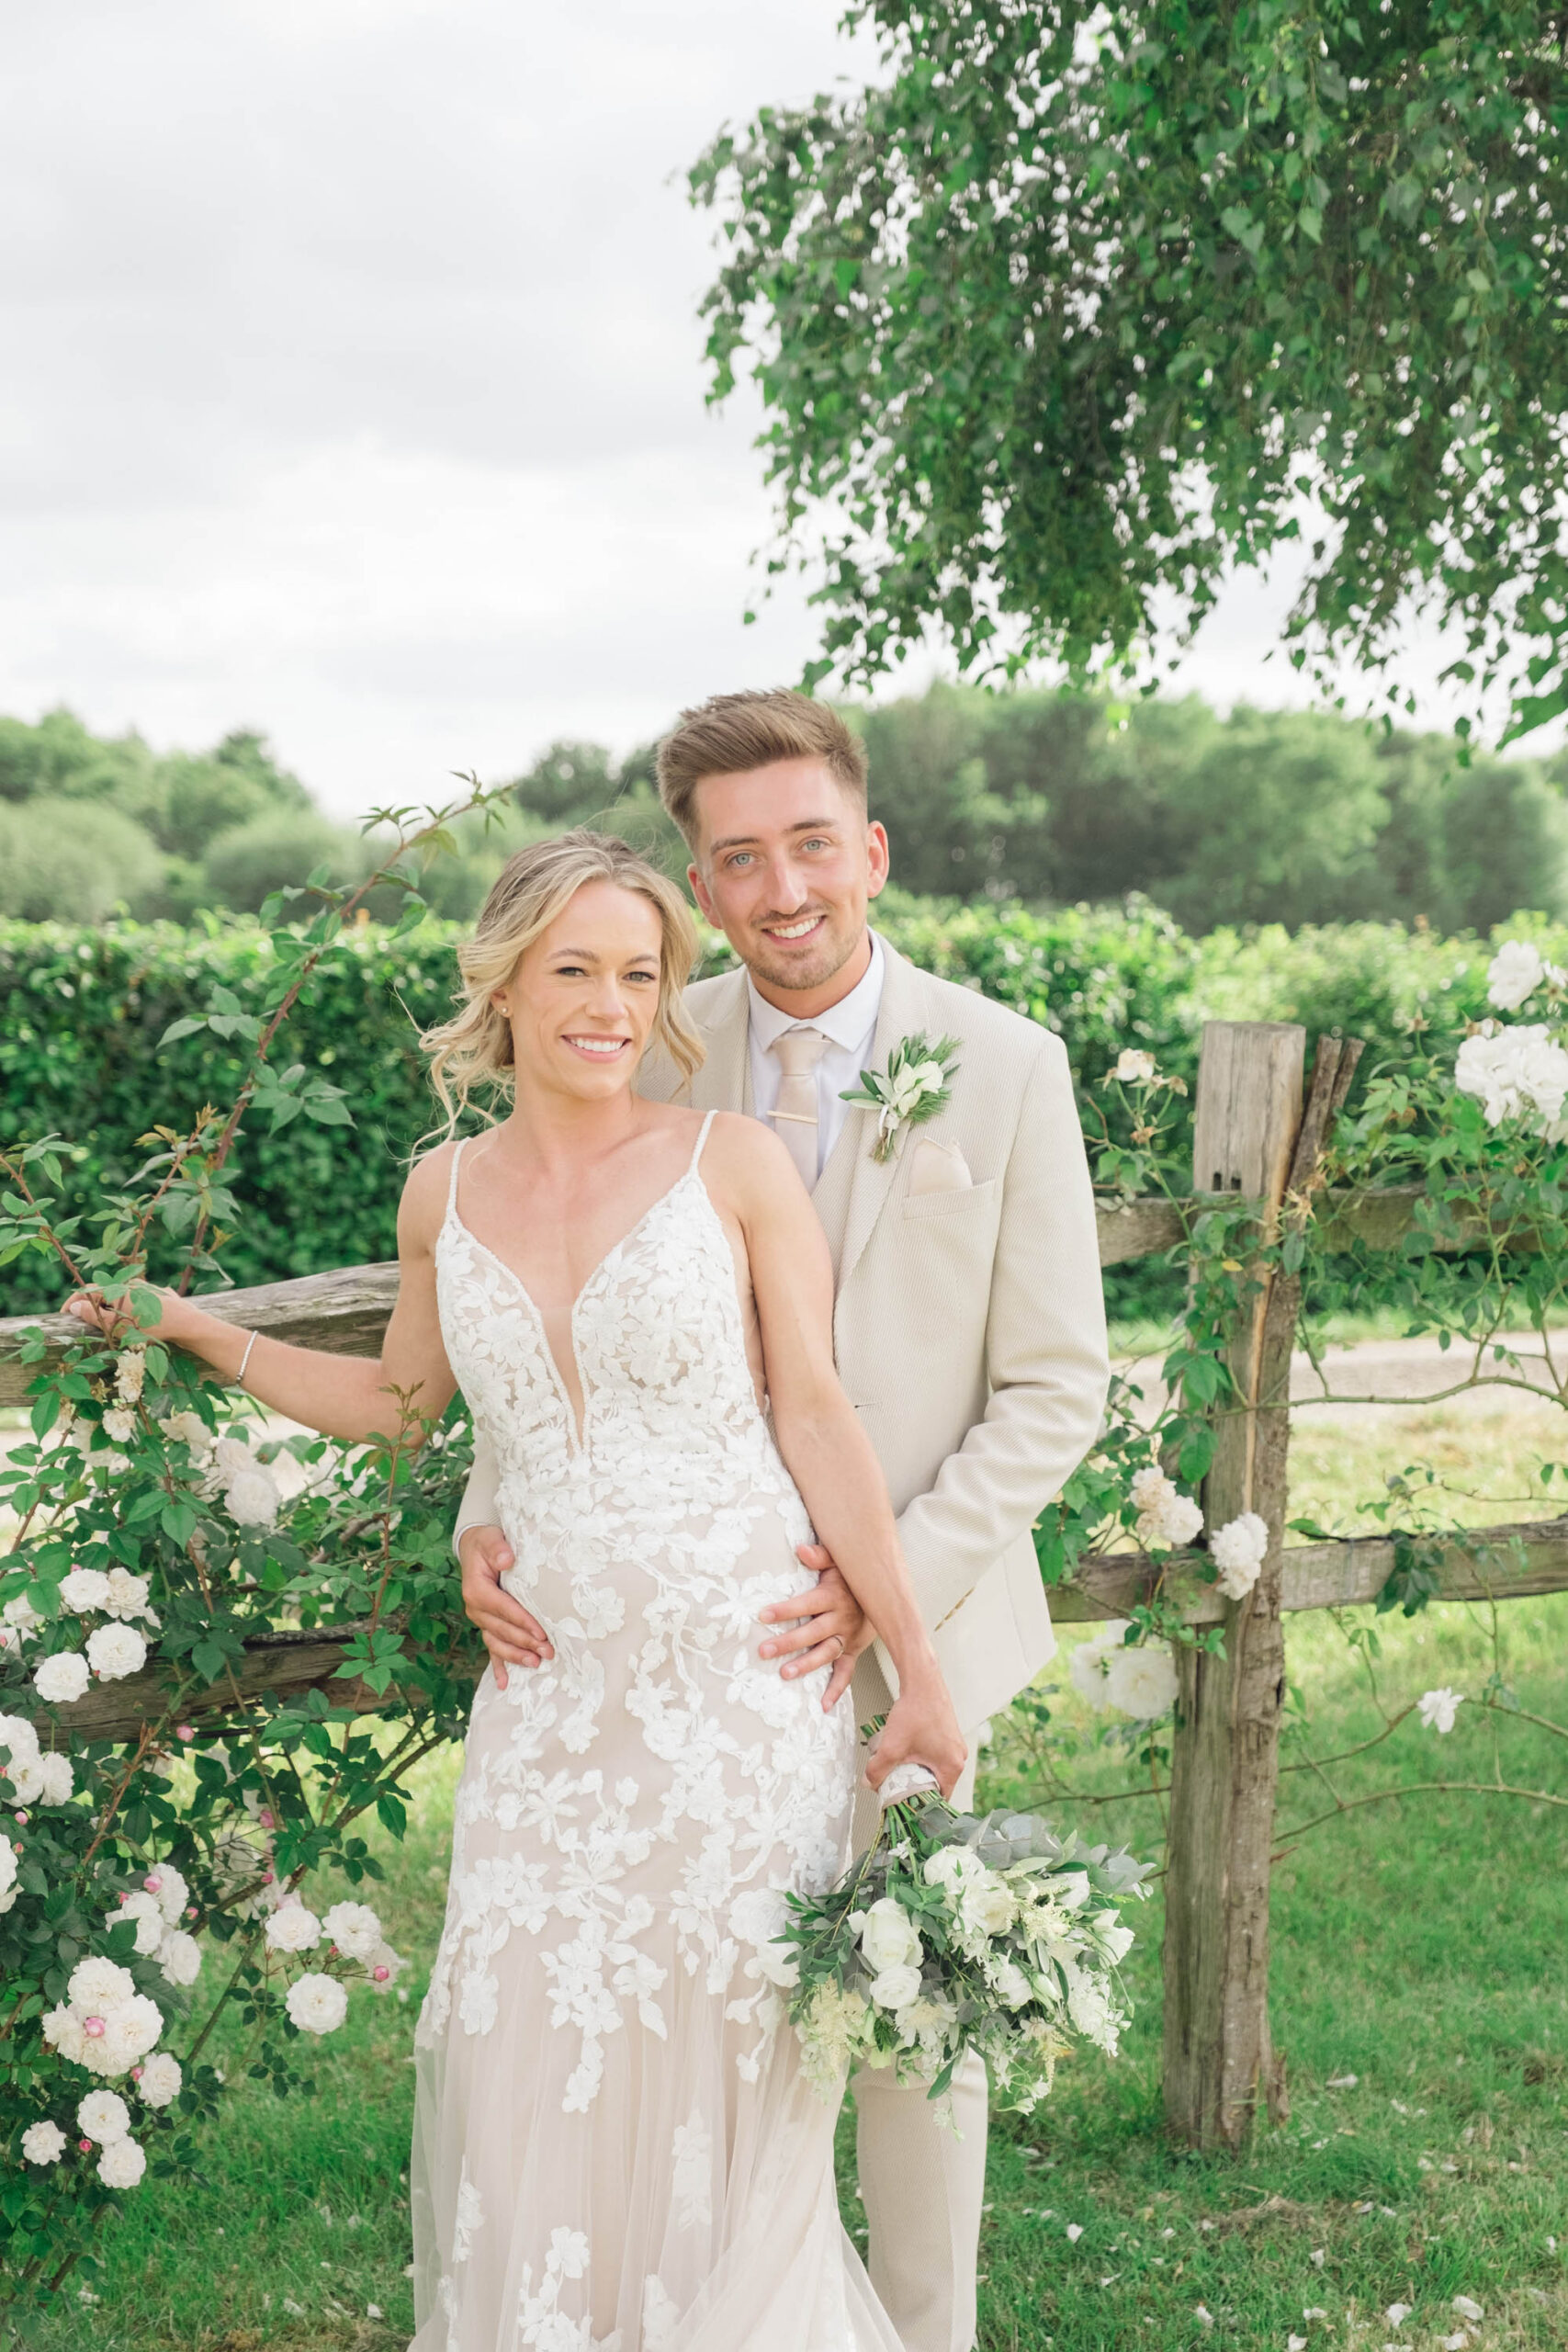 A light and airy photo of a bride and groom. She's in a strappy dress and he's in a pale suit. By Jordan Fox Photography